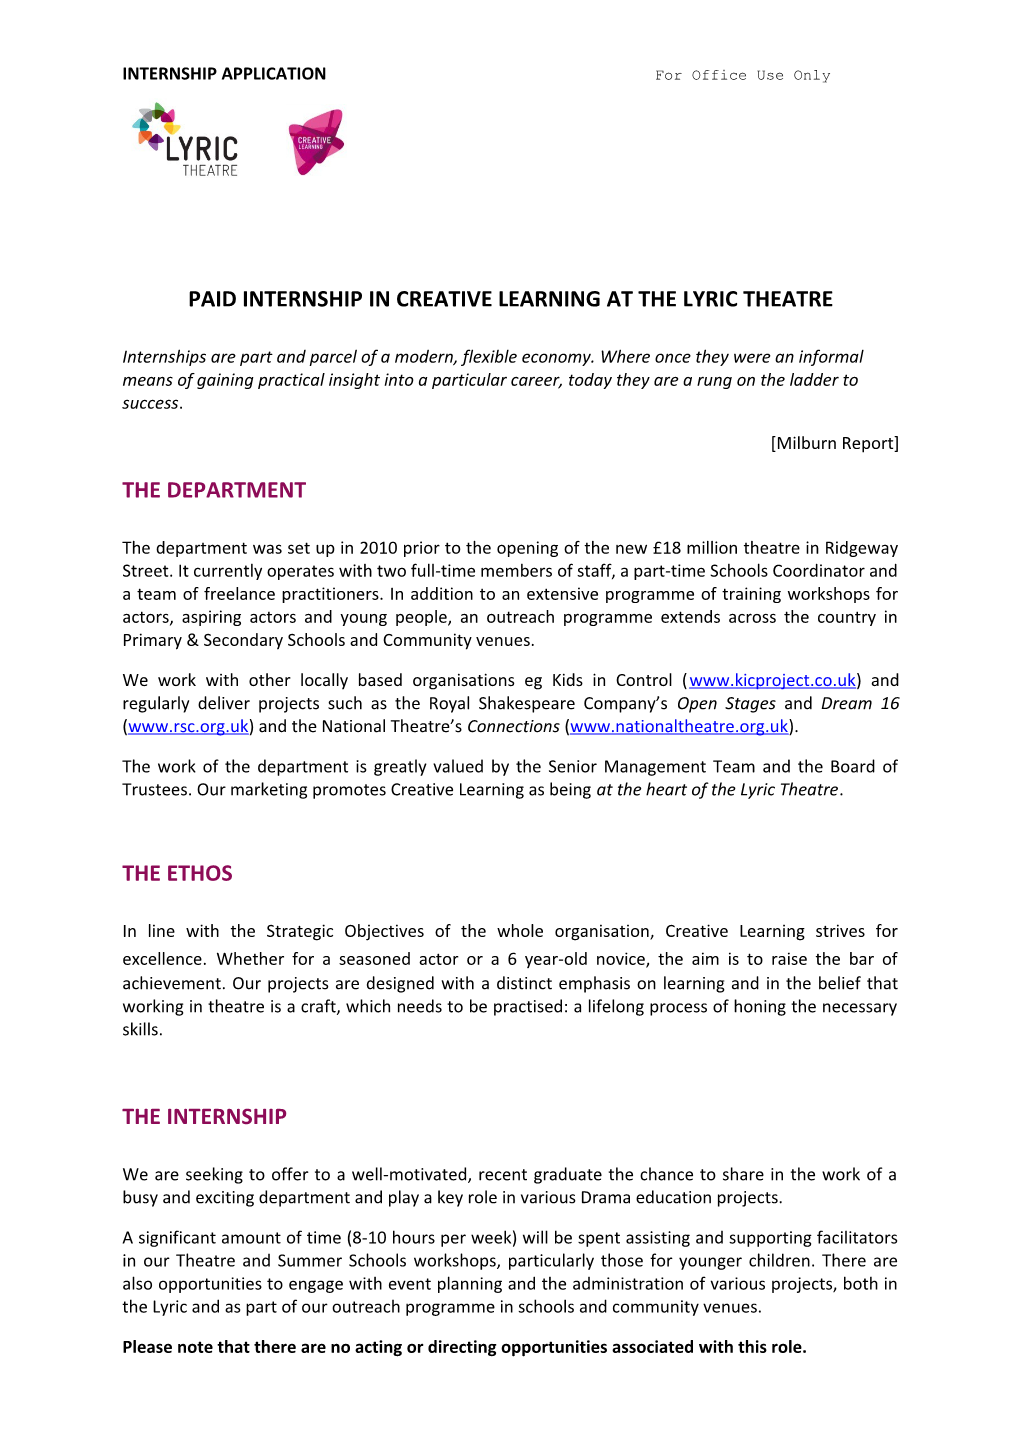 Paid Internship in Creative Learning at the Lyric Theatre